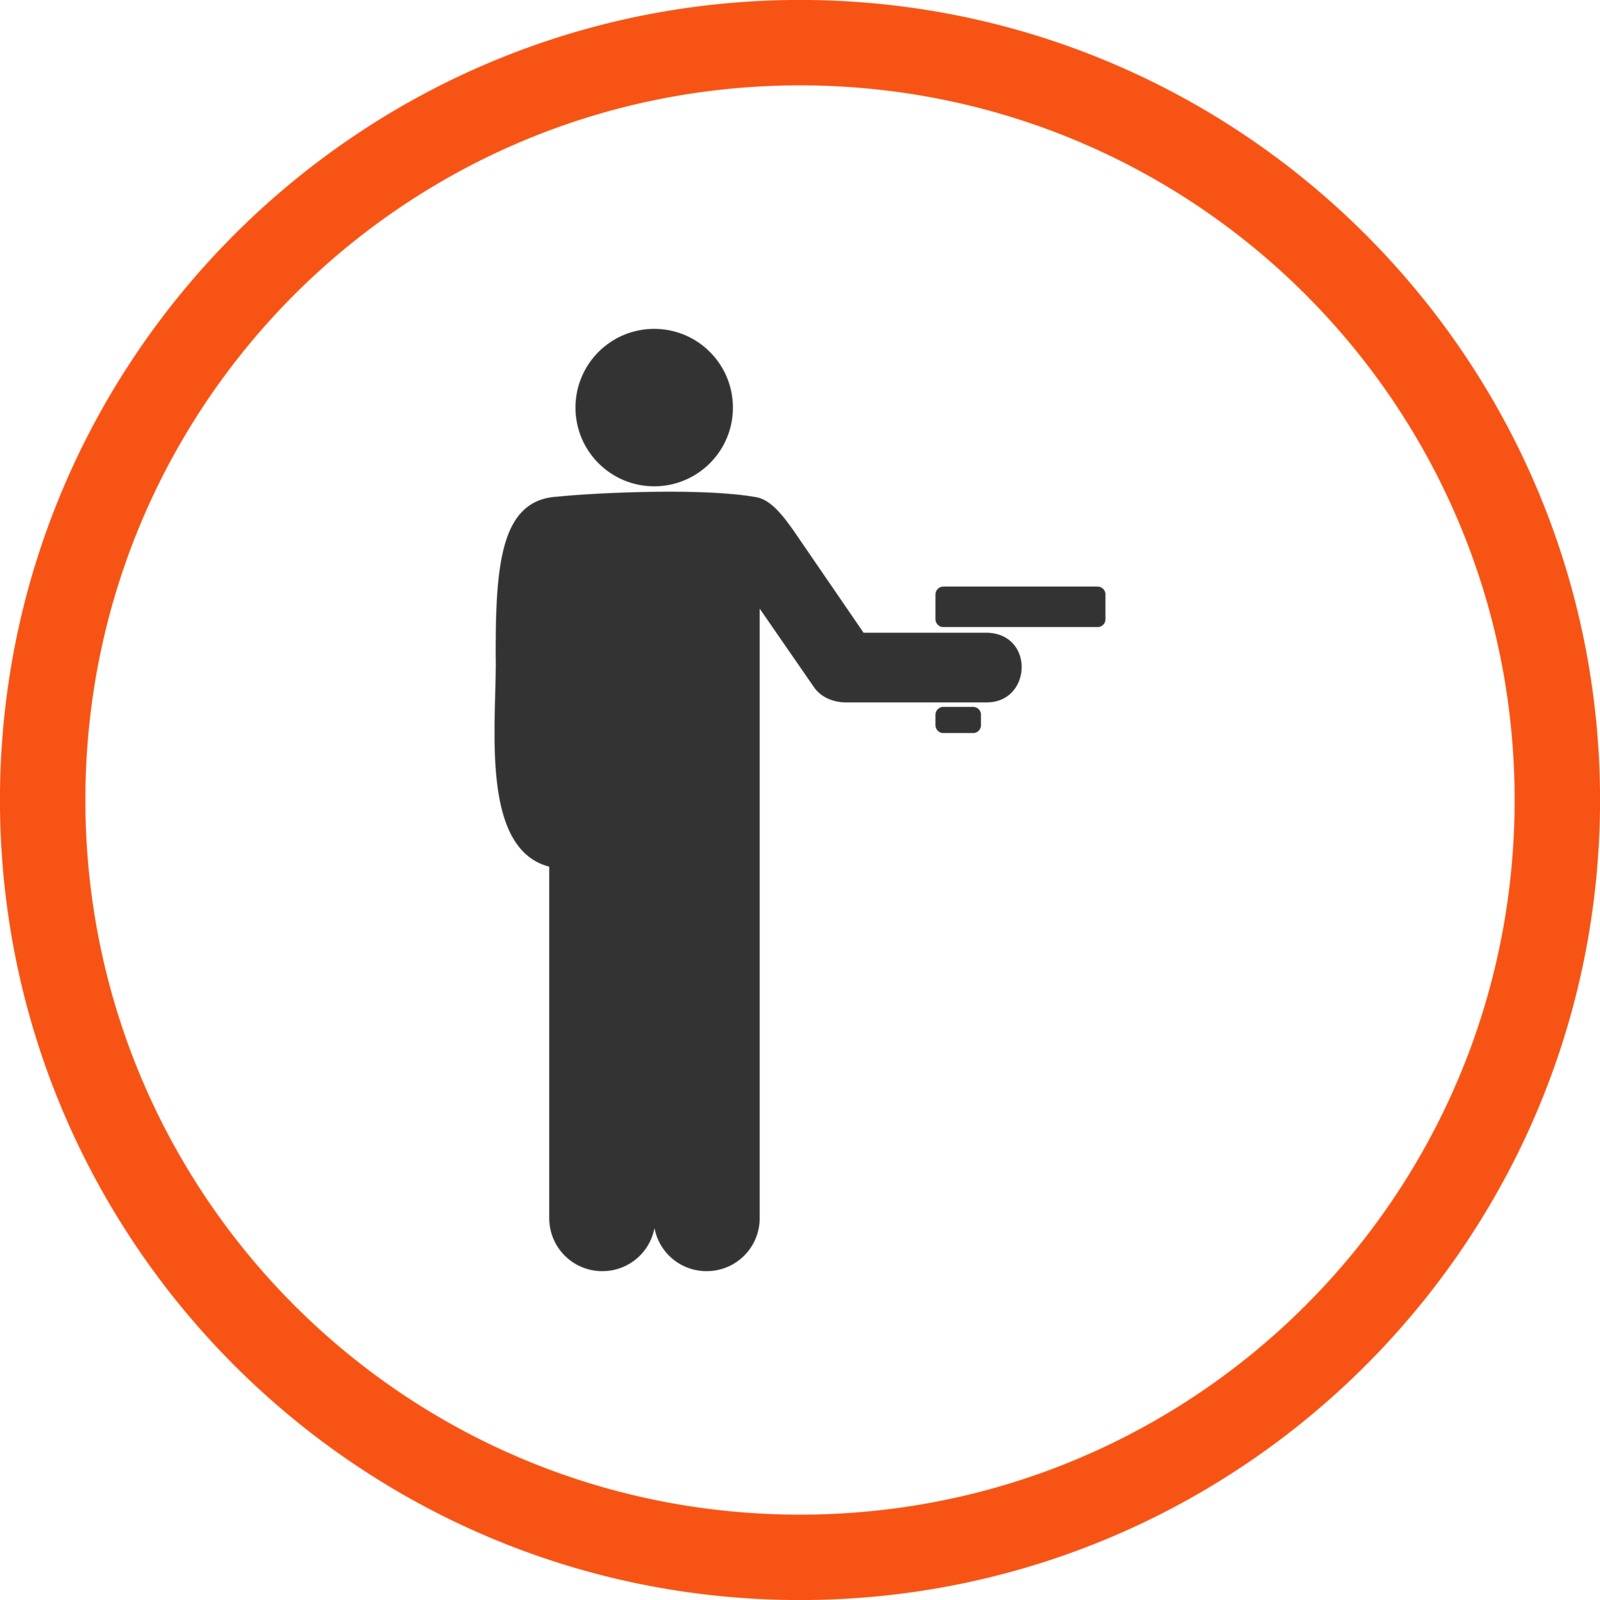 Robbery vector icon. This rounded flat symbol is drawn with orange and gray colors on a white background.